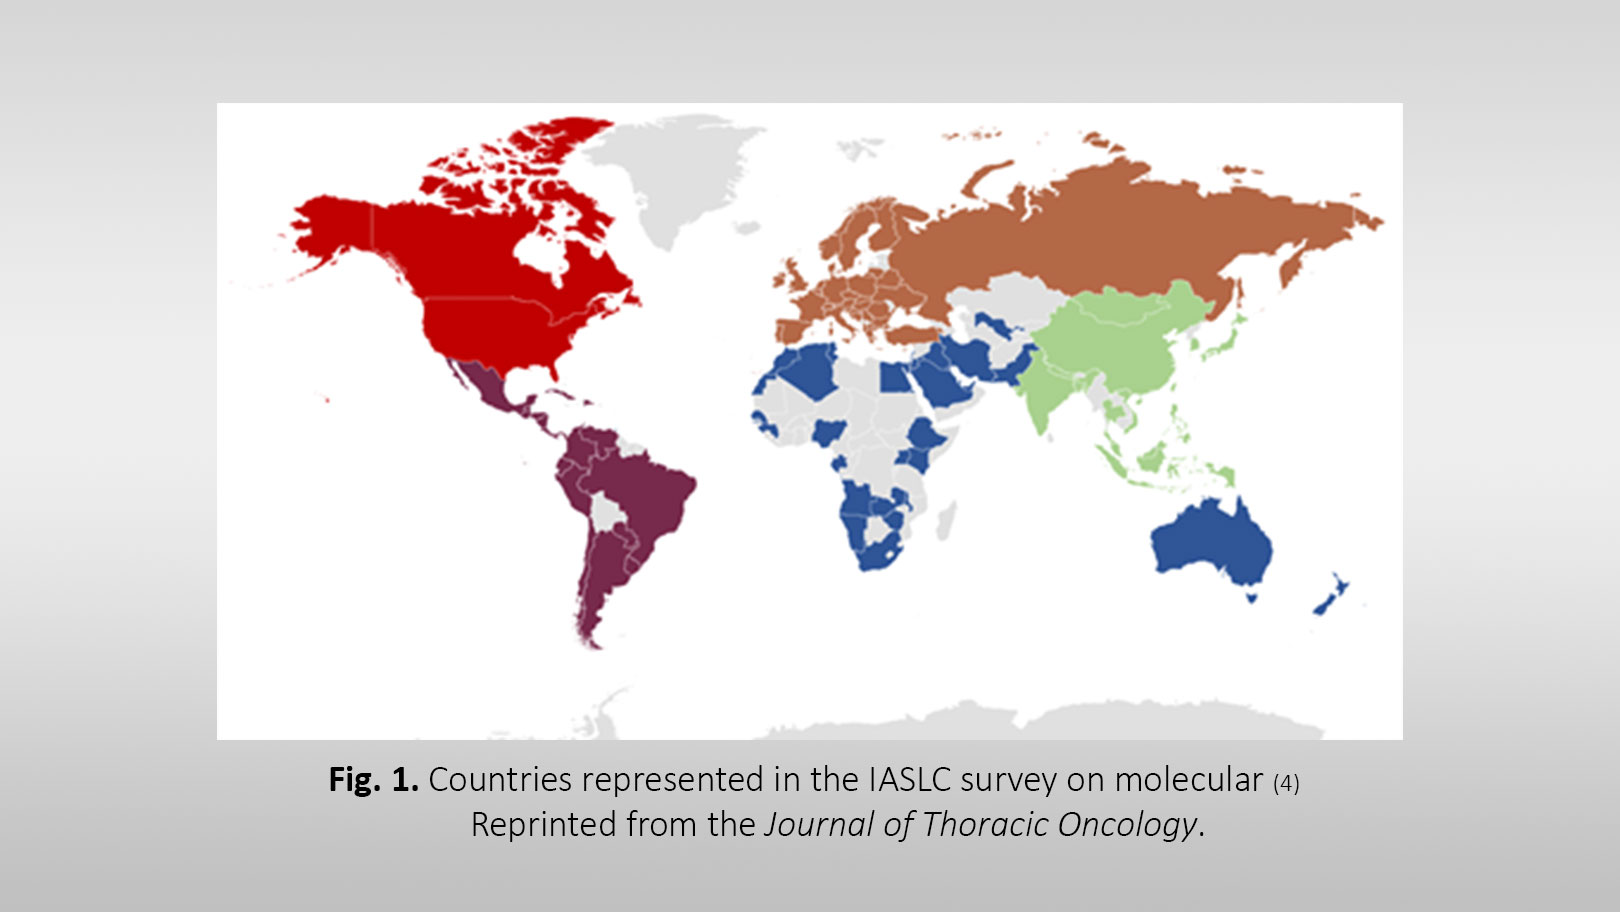 Improving Molecular Testing in Lung Cancer: What We Learned From the IASLC Global Survey 